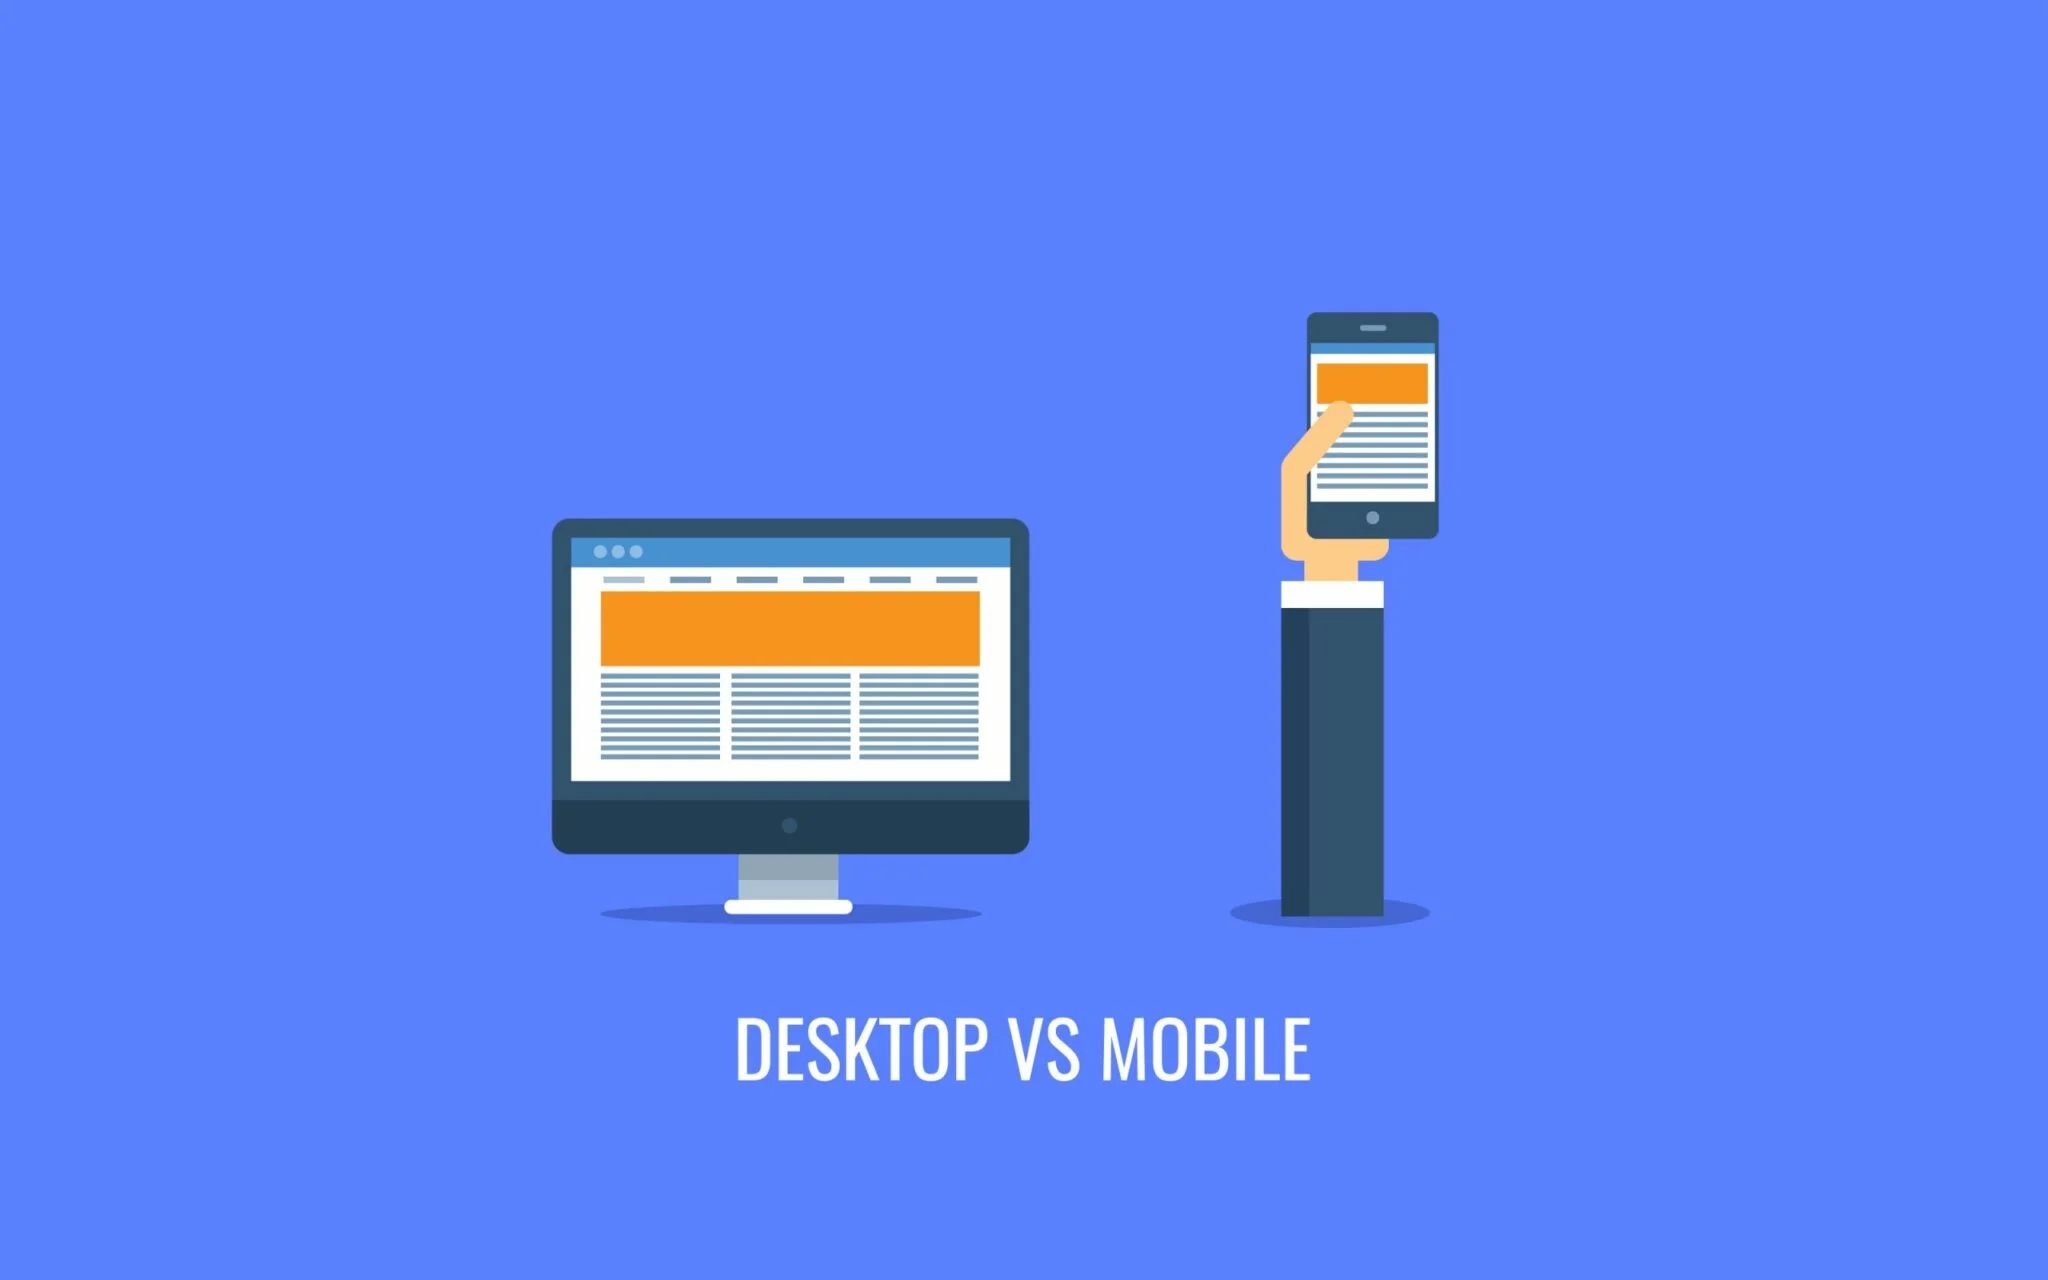 The image depicts a side-by-side comparison of a desktop computer and a mobile device against a solid blue background. On the left, the desktop features a large monitor displaying a website with an orange header and multiple text sections. On the right, a hand holds a mobile device showing a smaller version of the same website, adapted for a mobile screen with the same color scheme. The text 'DESKTOP VS MOBILE' is prominently displayed beneath the illustrations, emphasizing the theme of comparing web traffic sources between these two platforms